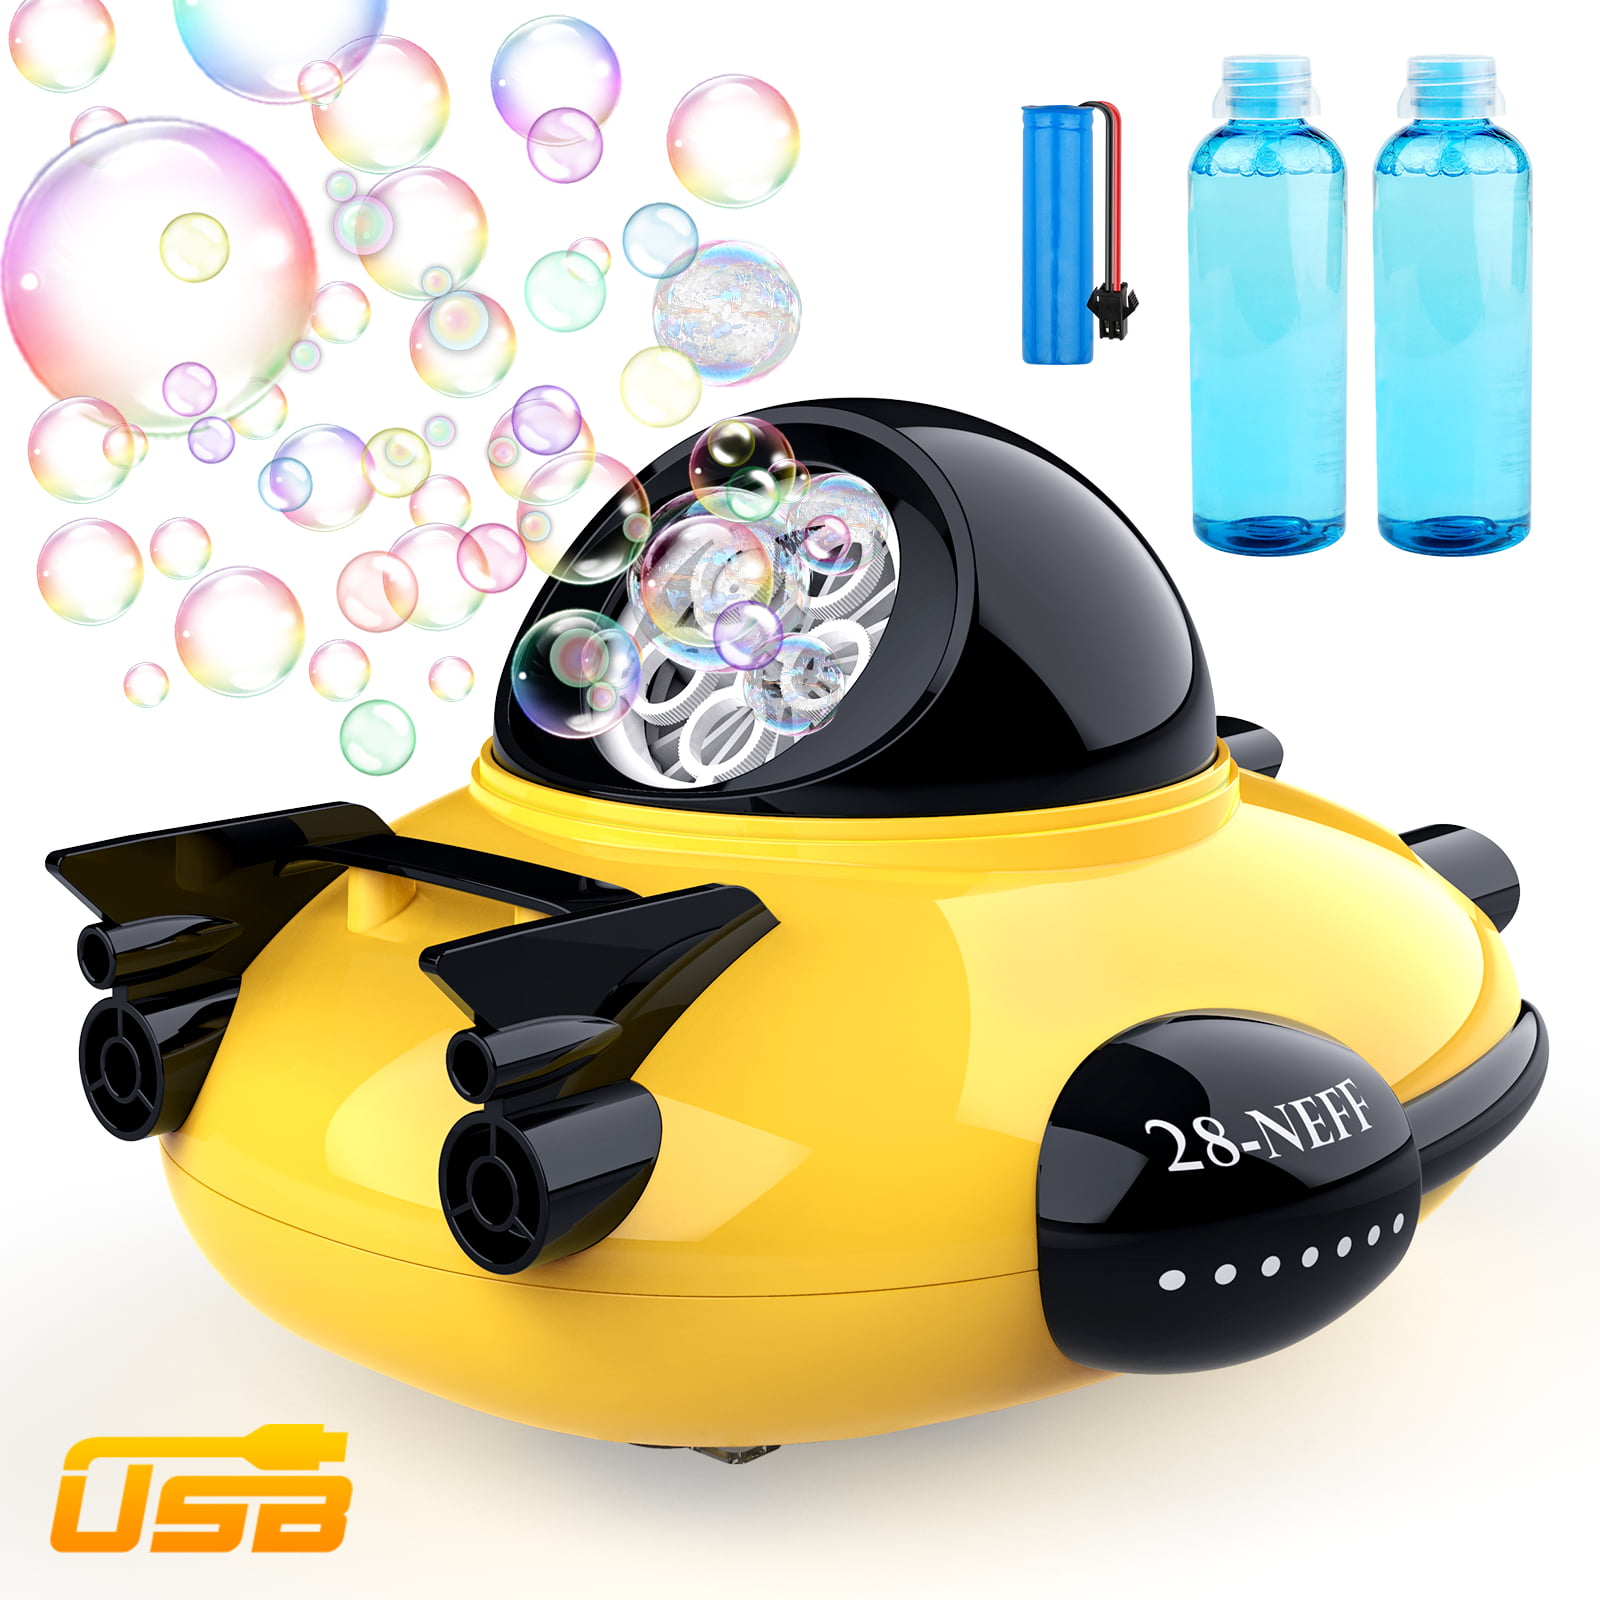 2 Speed Levels for Party Wedding Indoor Outdoor Activities Automatic Bubble Blower 2000+ per Min Not Included Powered By DC Cable or 4xAA Battery Bubble Machine Portable Bubble Maker Toy for Kids